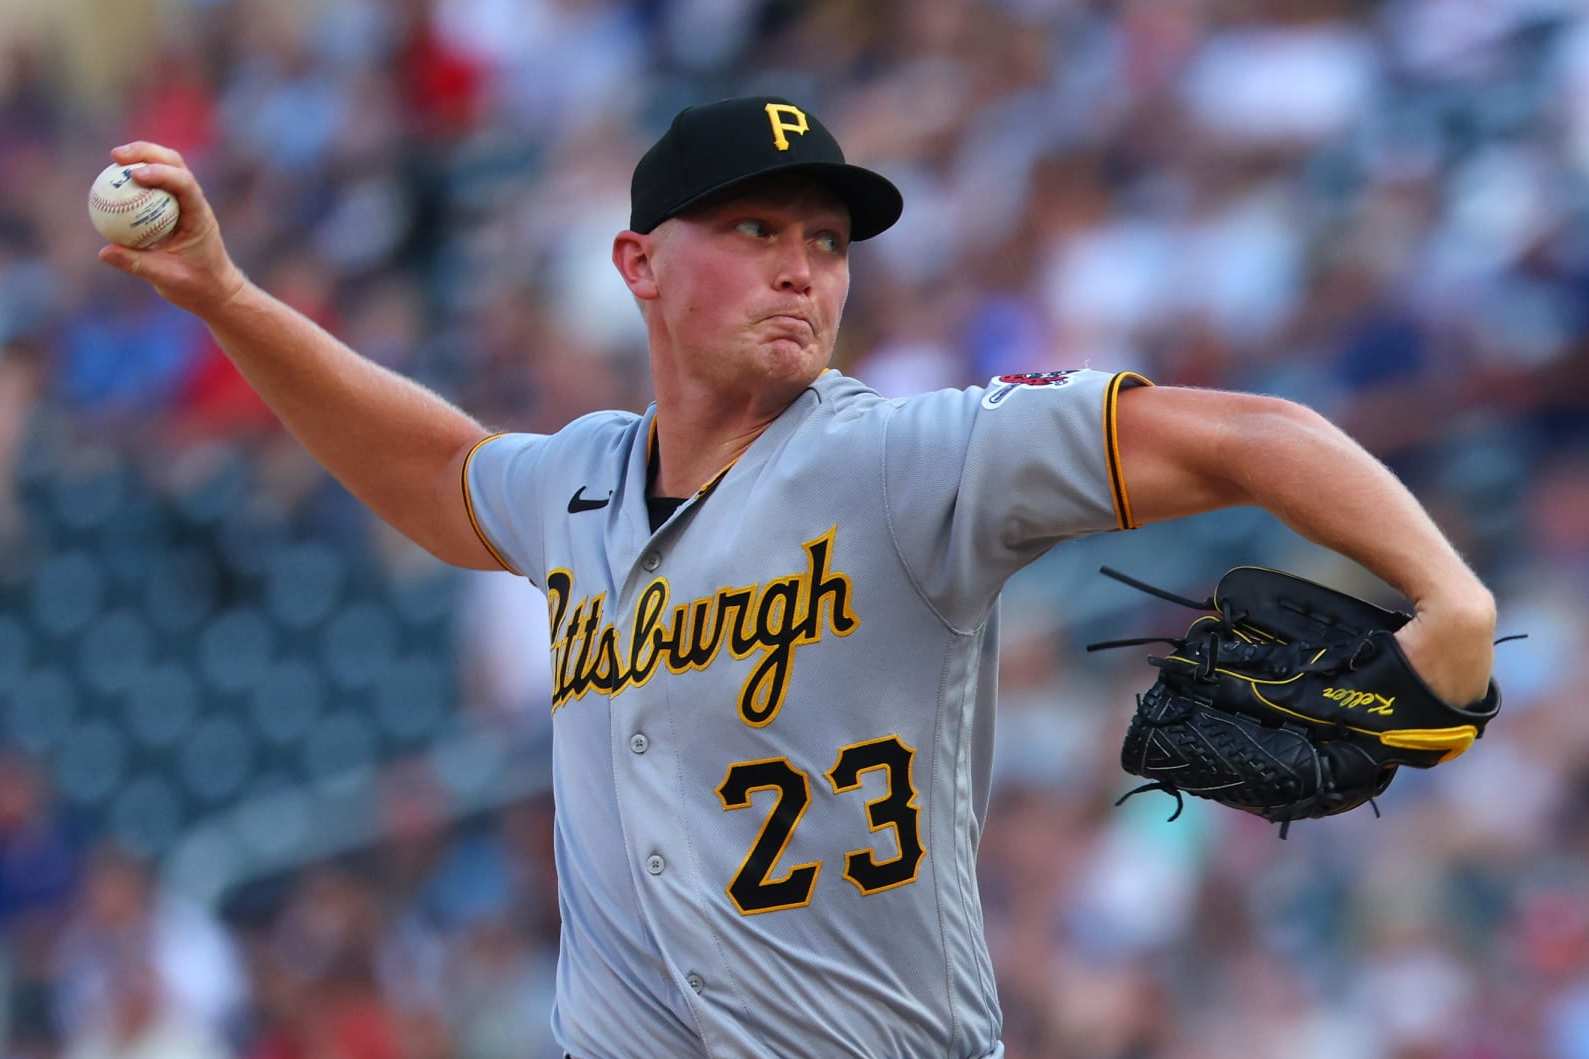 In Pittsburgh, Pirates' overhaul gains momentum by the day